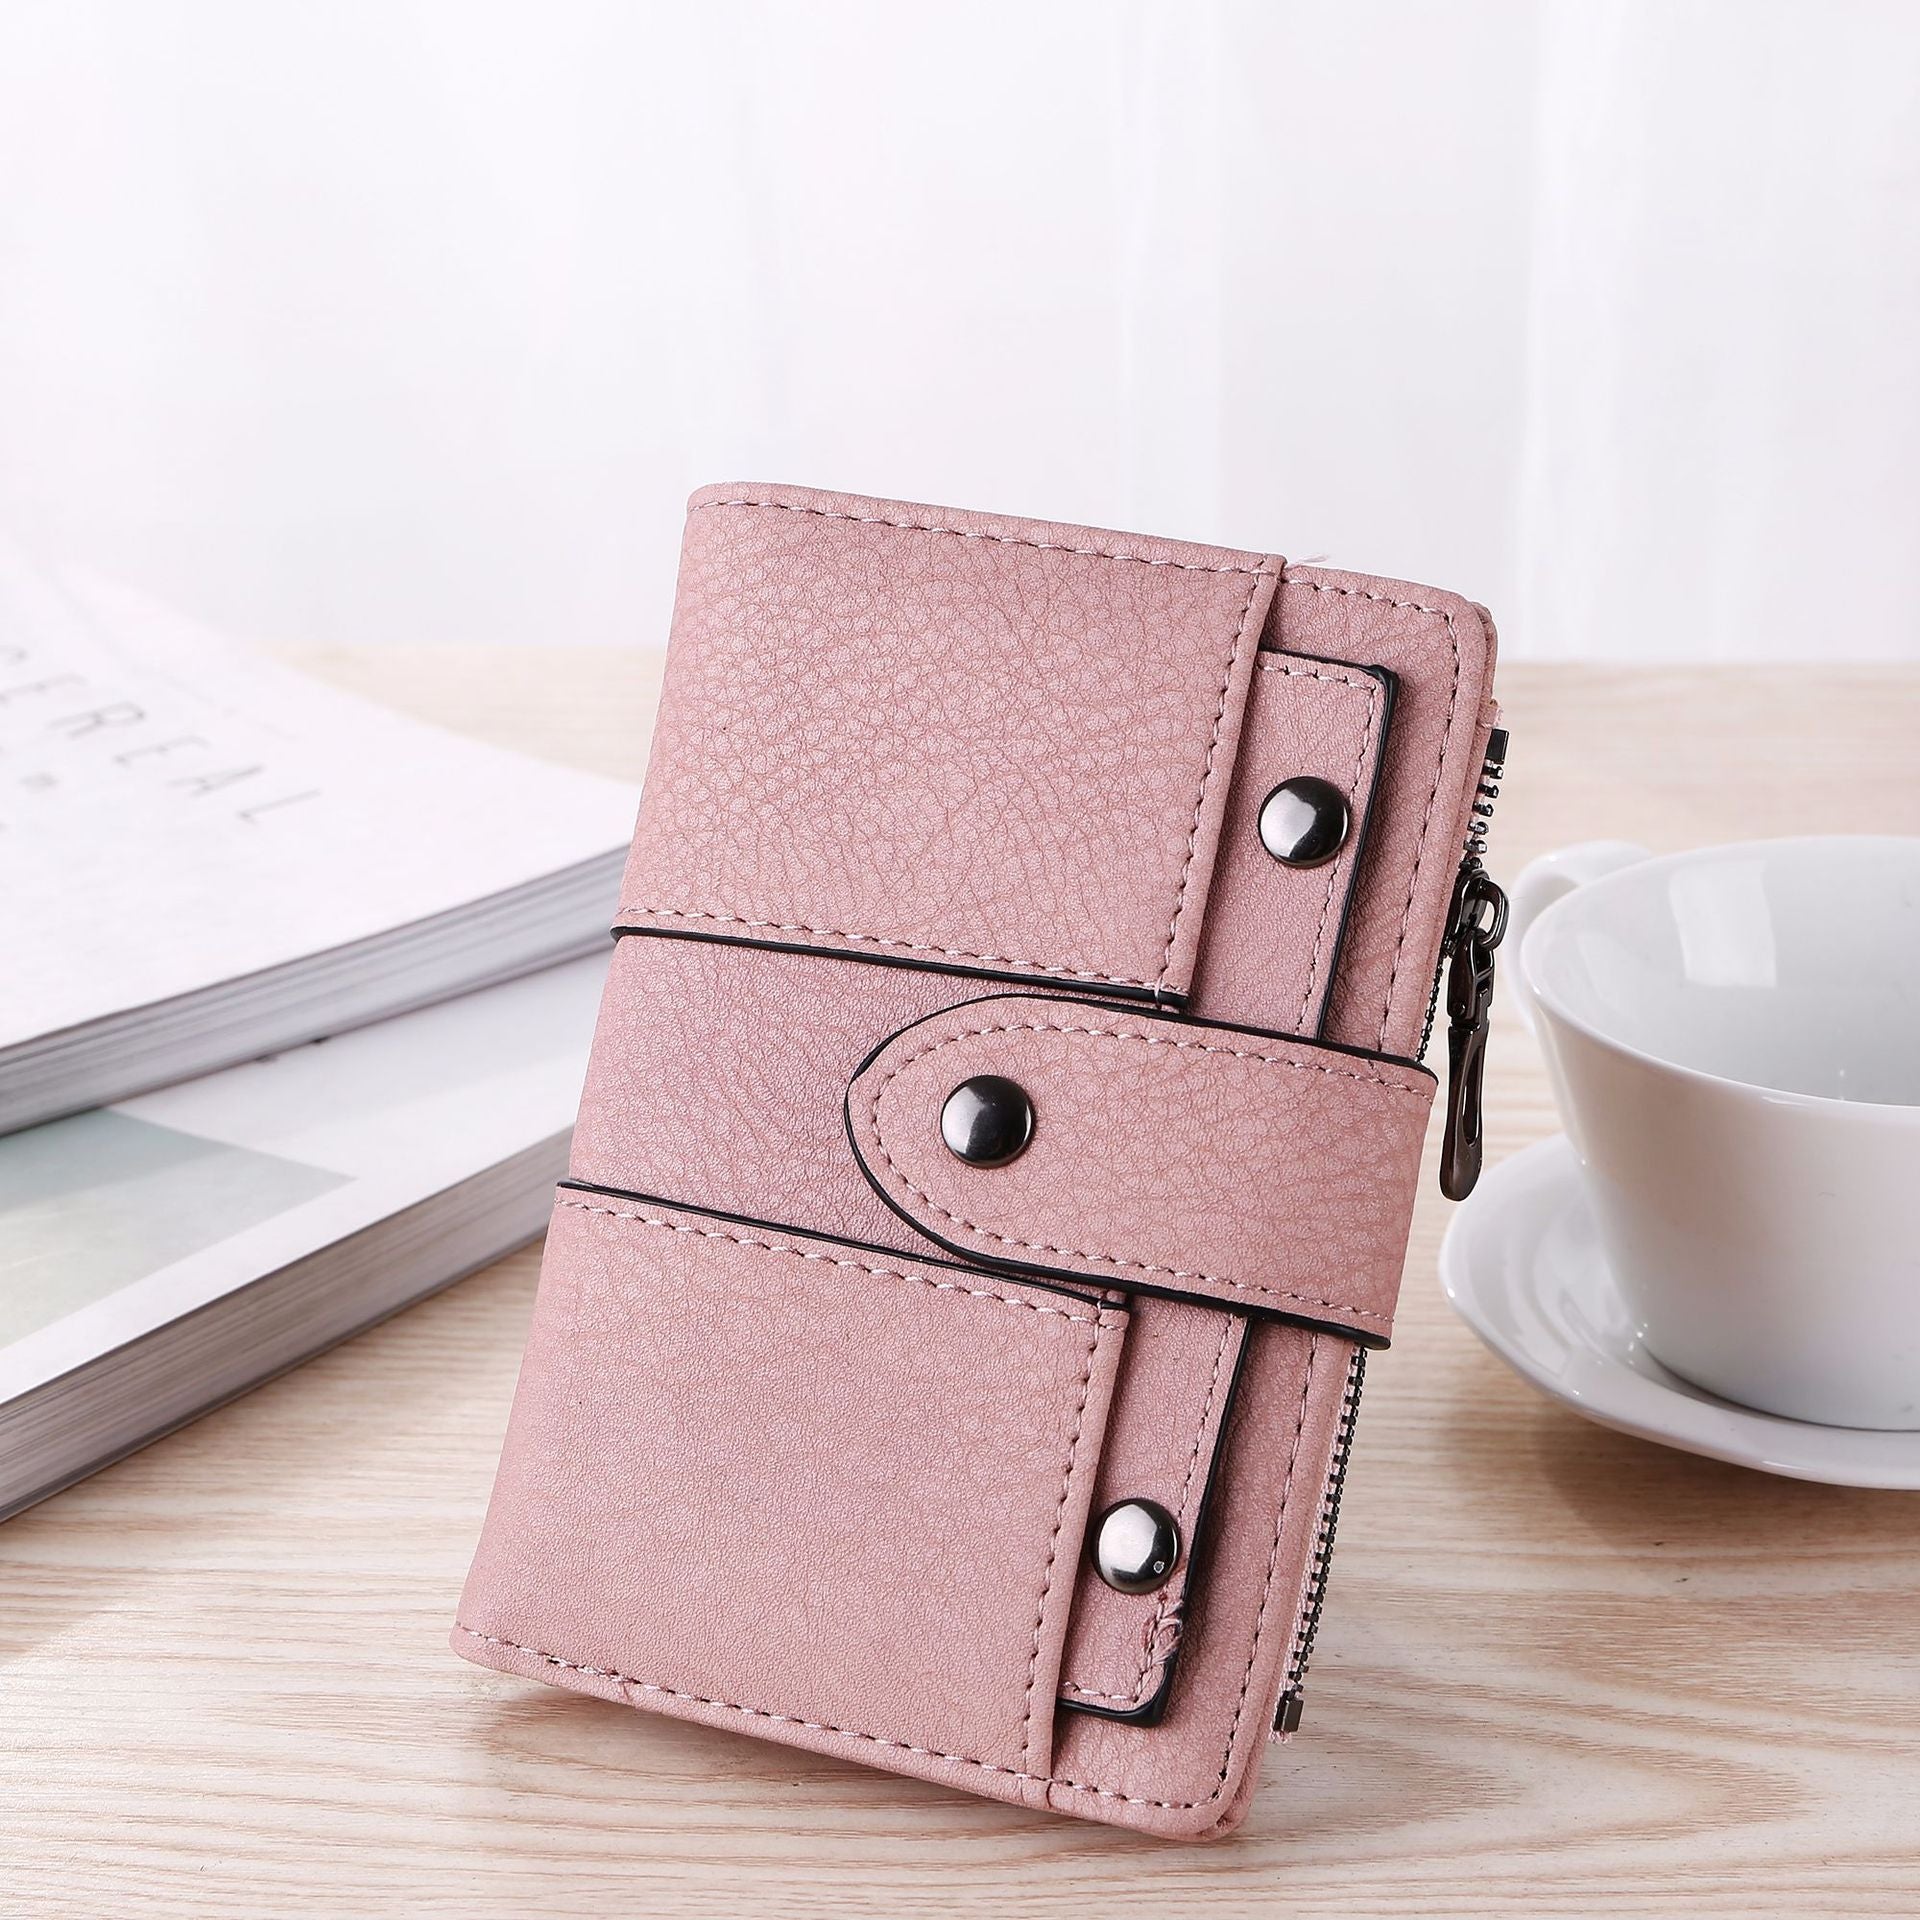 New Fashion PU Leather Mini Zipper Wallet Classic Card Holder Cute Coin  Storage Bag VIP Gift With Plastics Dust Bag Lady Party Gif290c From  Outbong22, $17.46